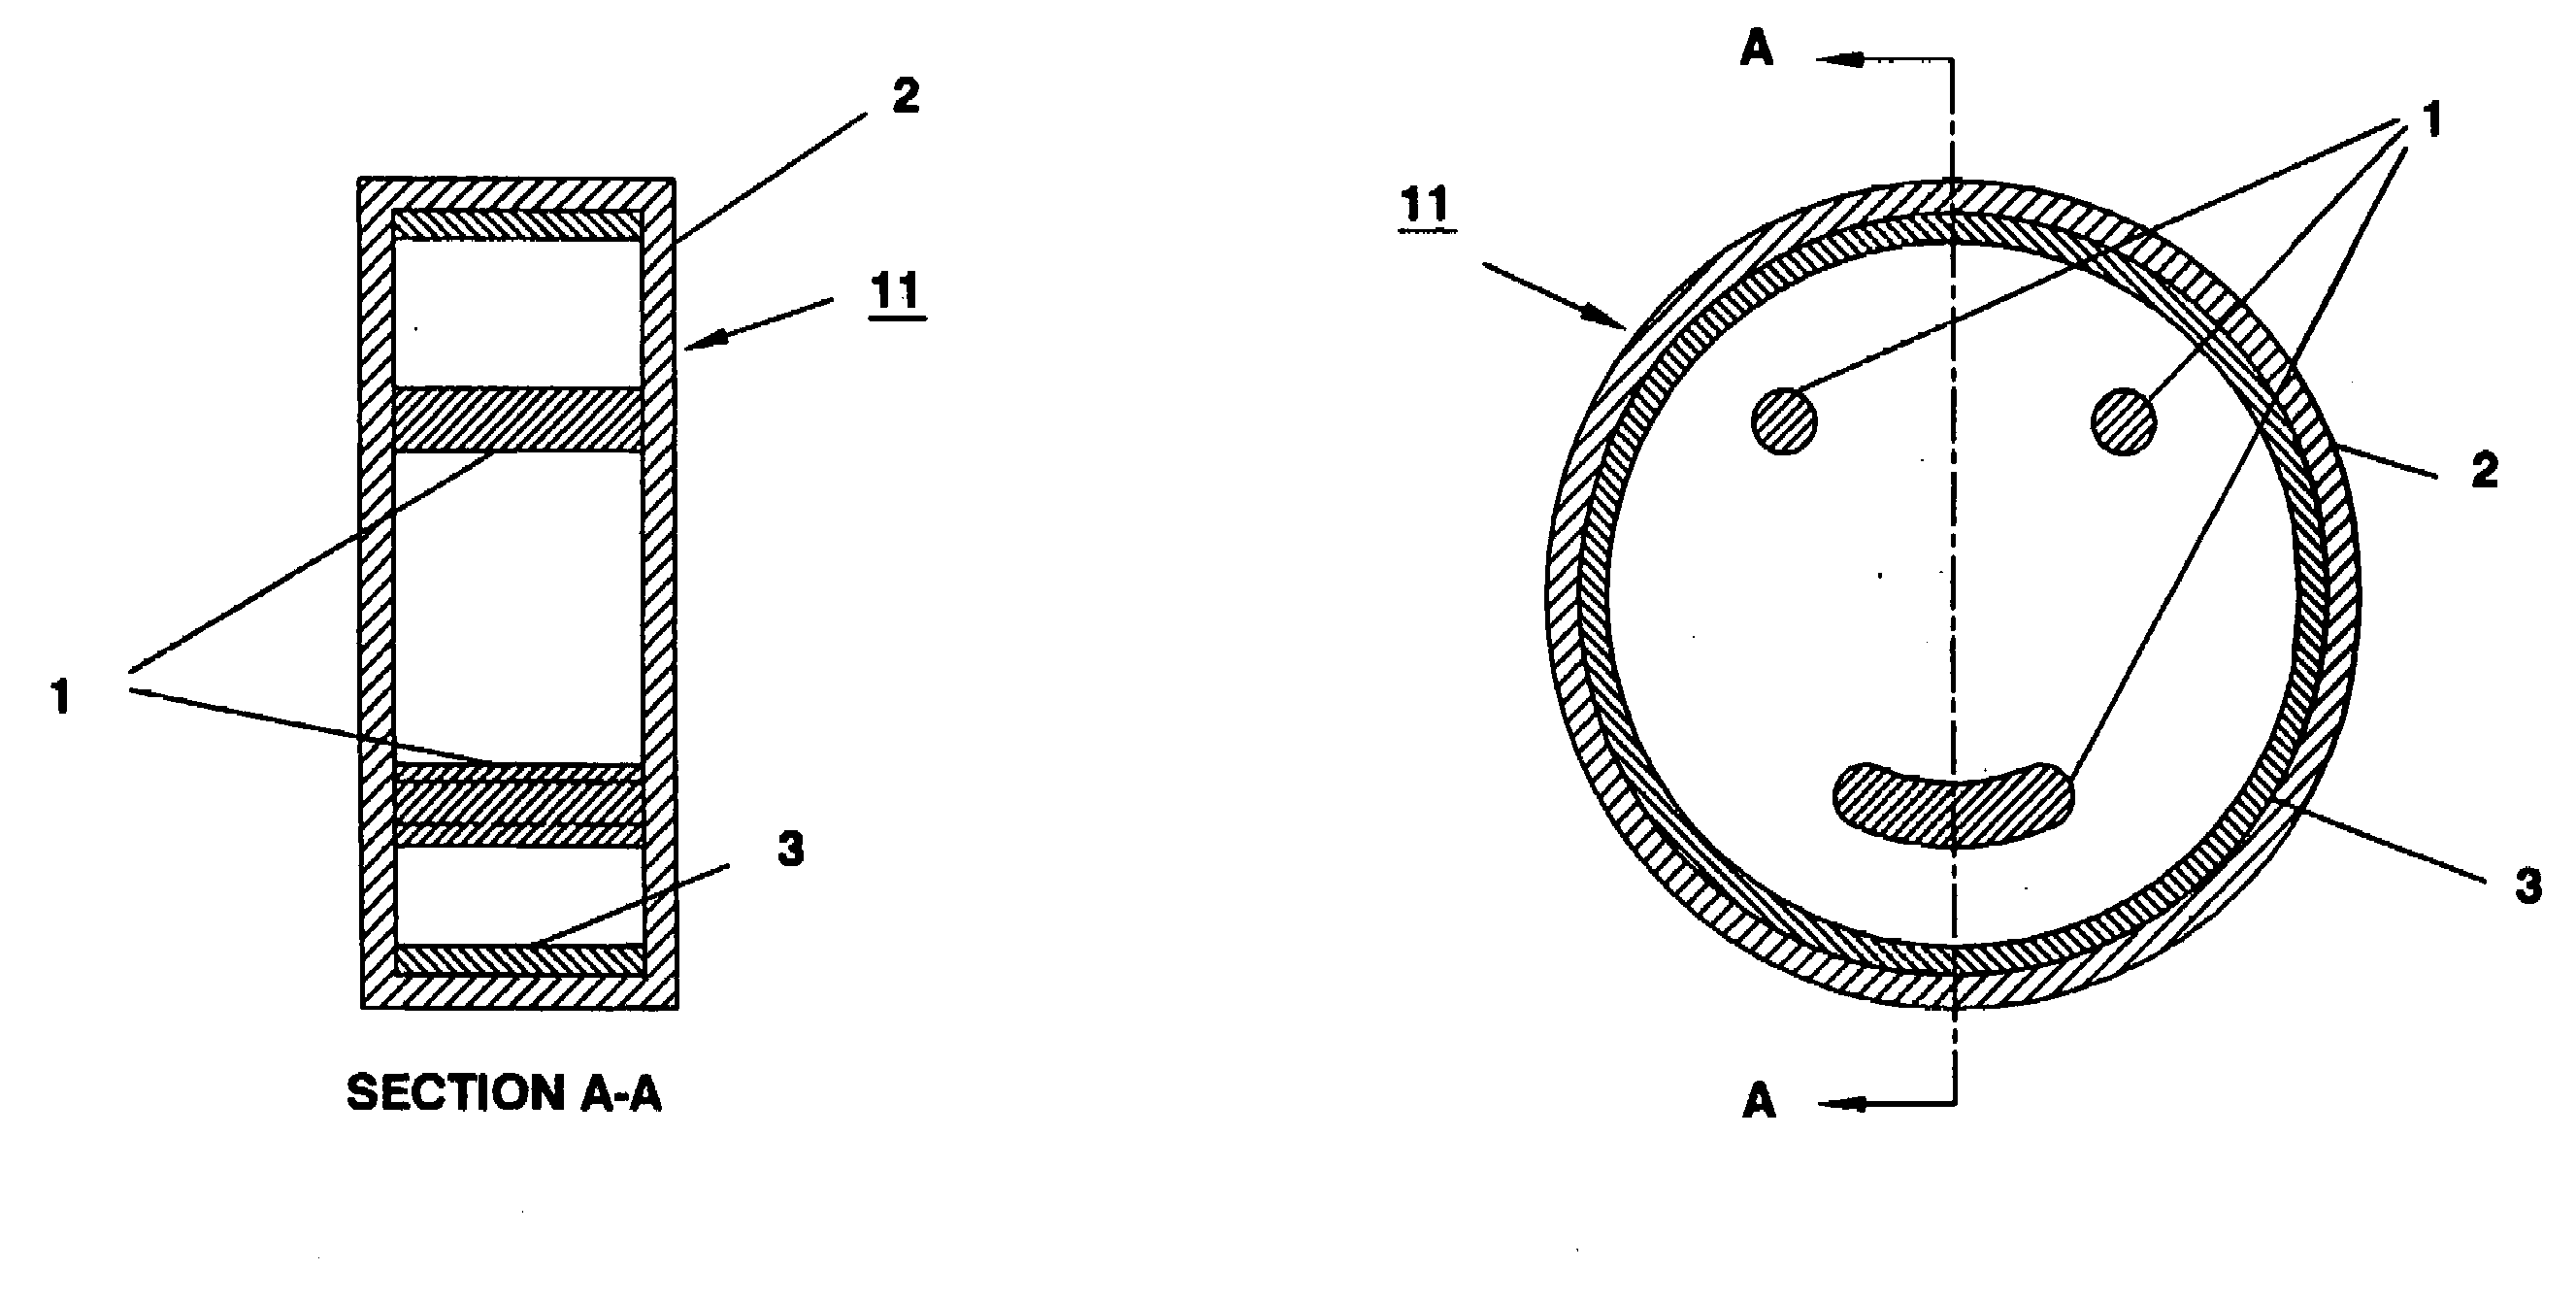 Rod-loaded radiofrequency cavities and couplers